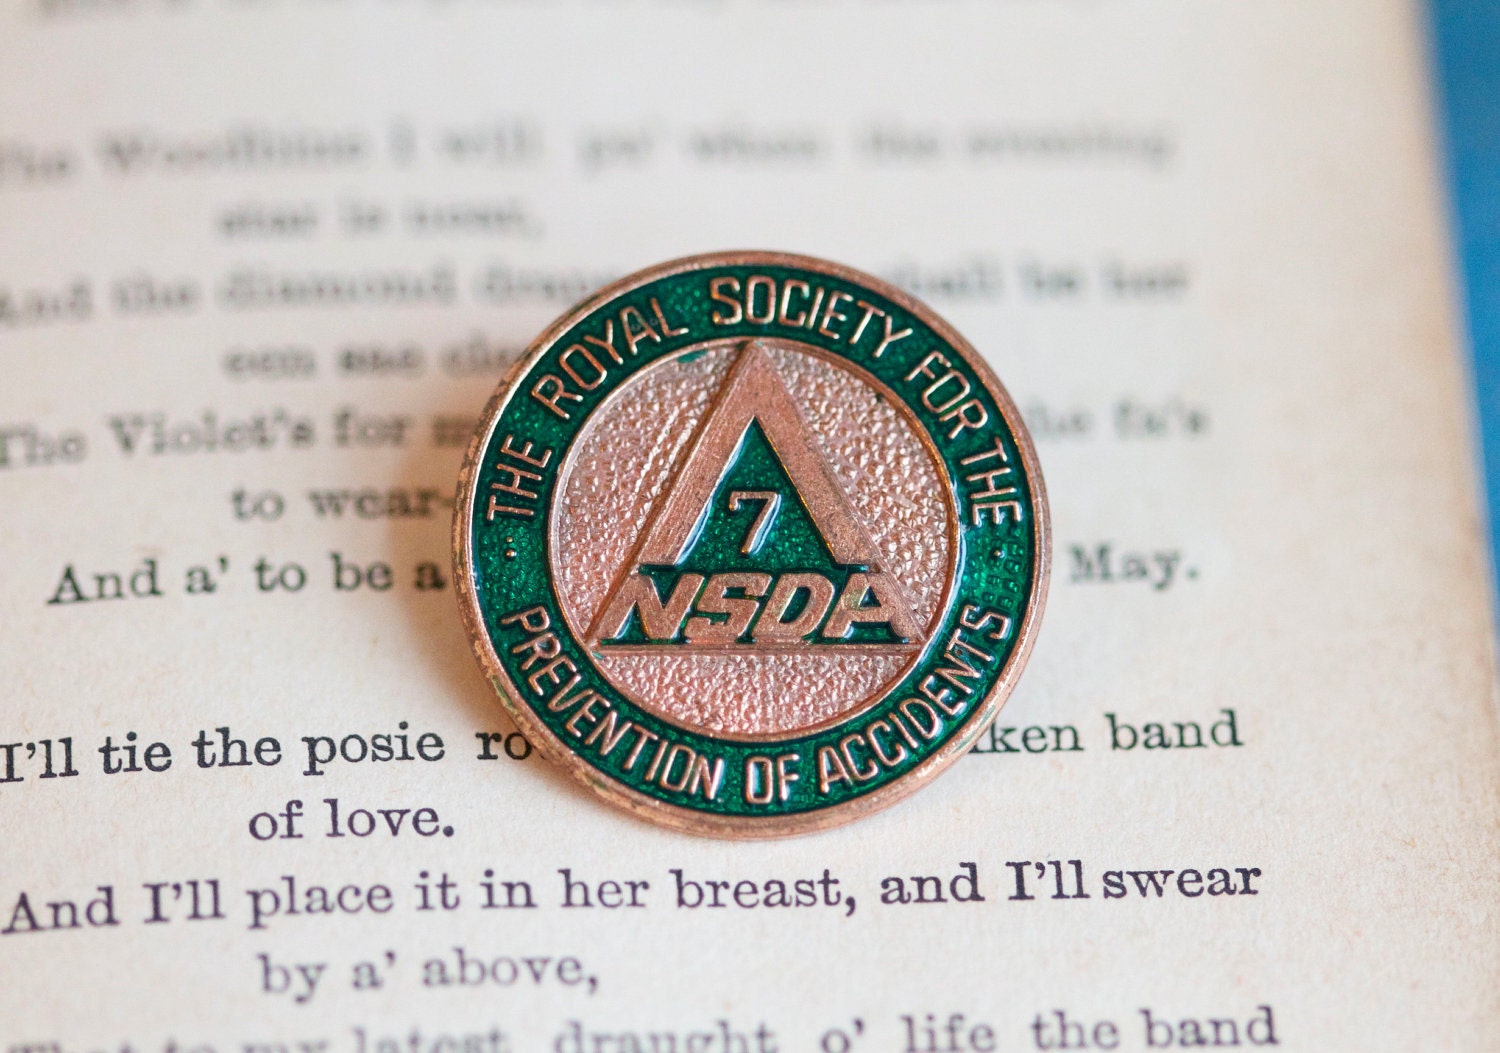 Accident Prone - The Royal Society for the Prevention of Accidents Vintage Badge